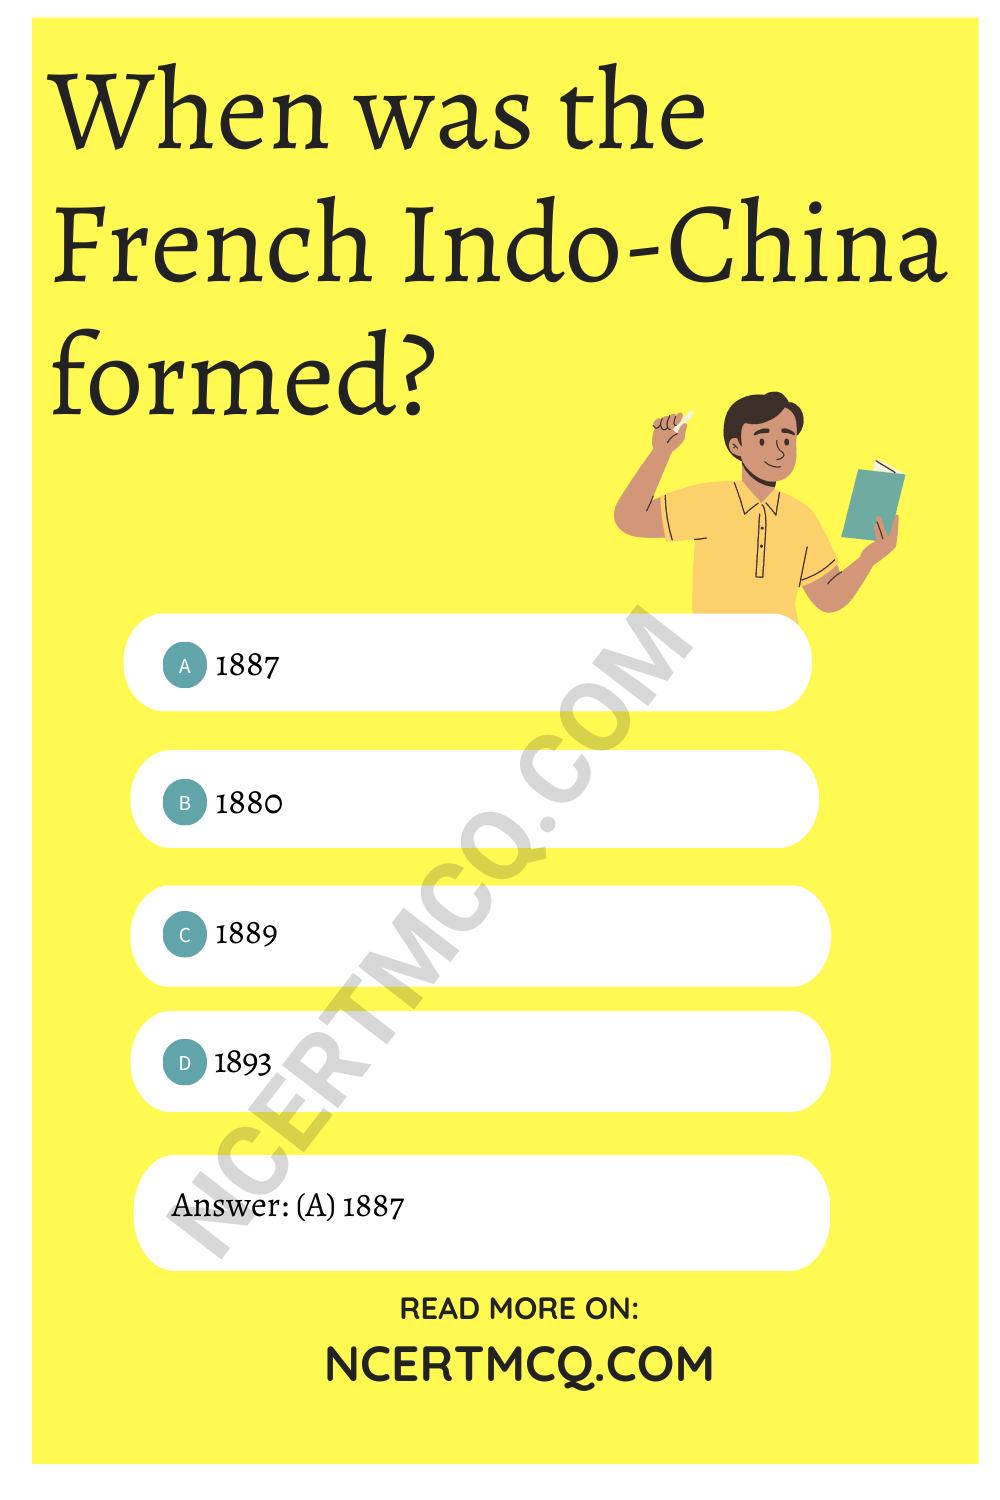 When was the French Indo-China formed?